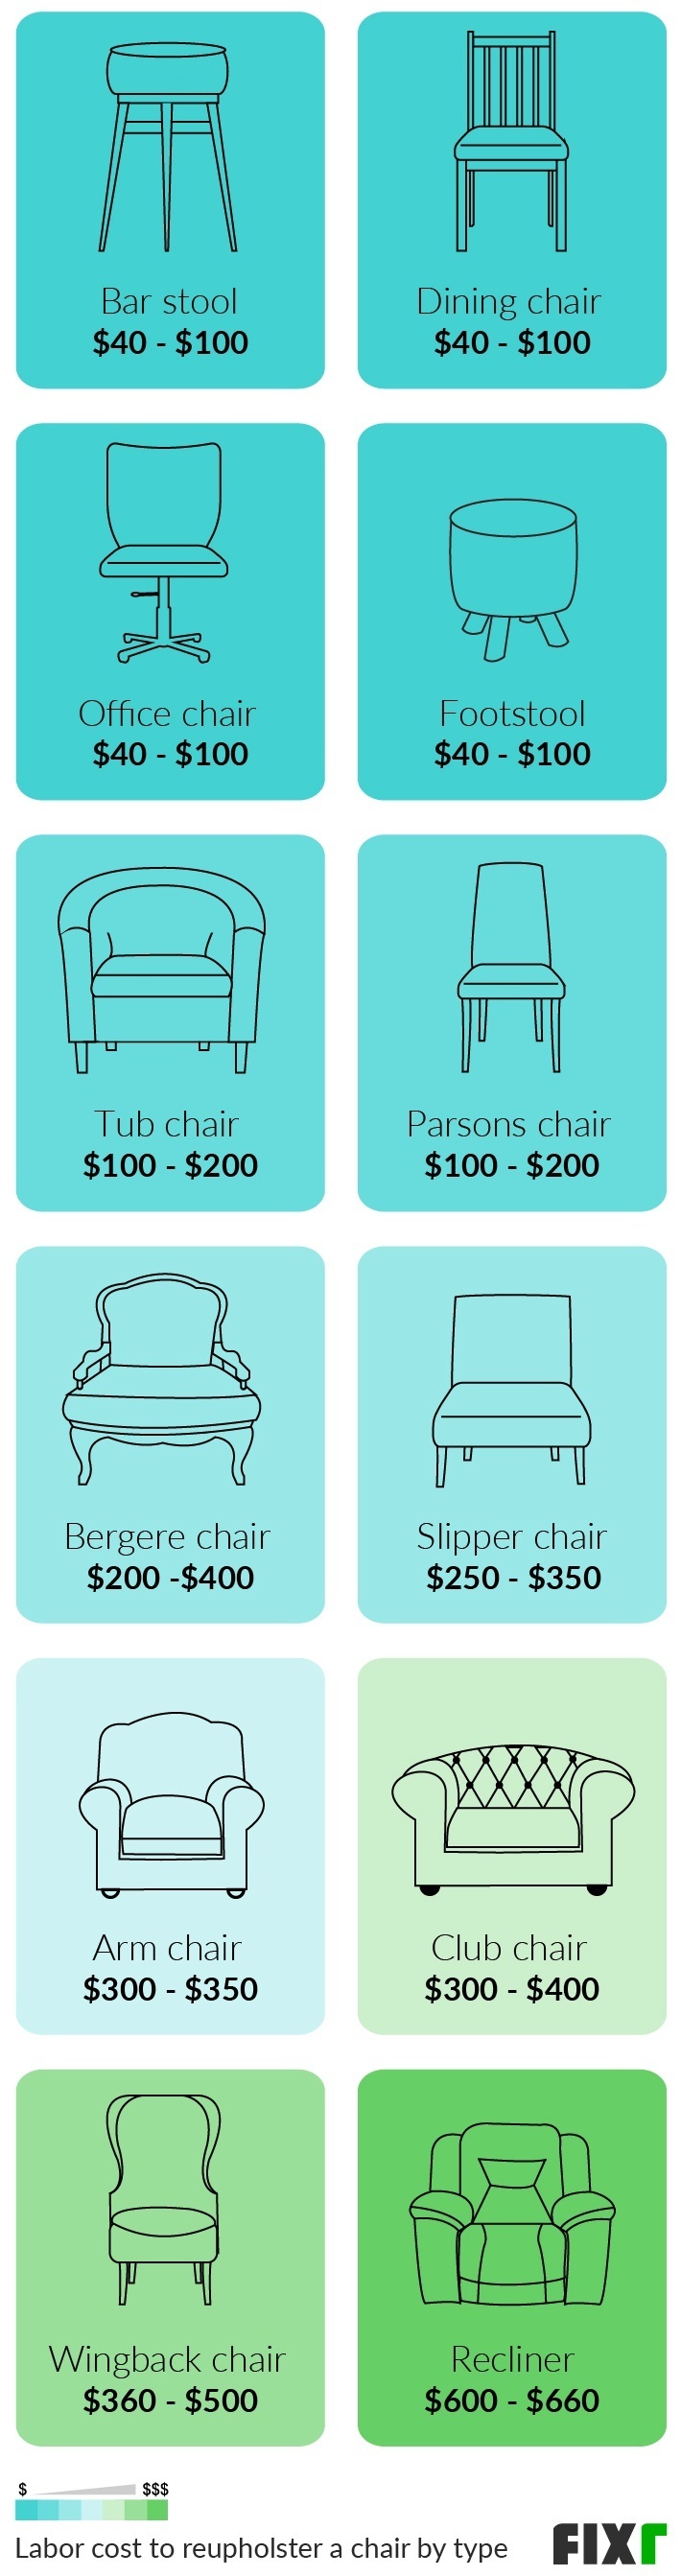 2021 Cost To Reupholster A Chair, How Much Does It Cost To Recover A Chair Uk